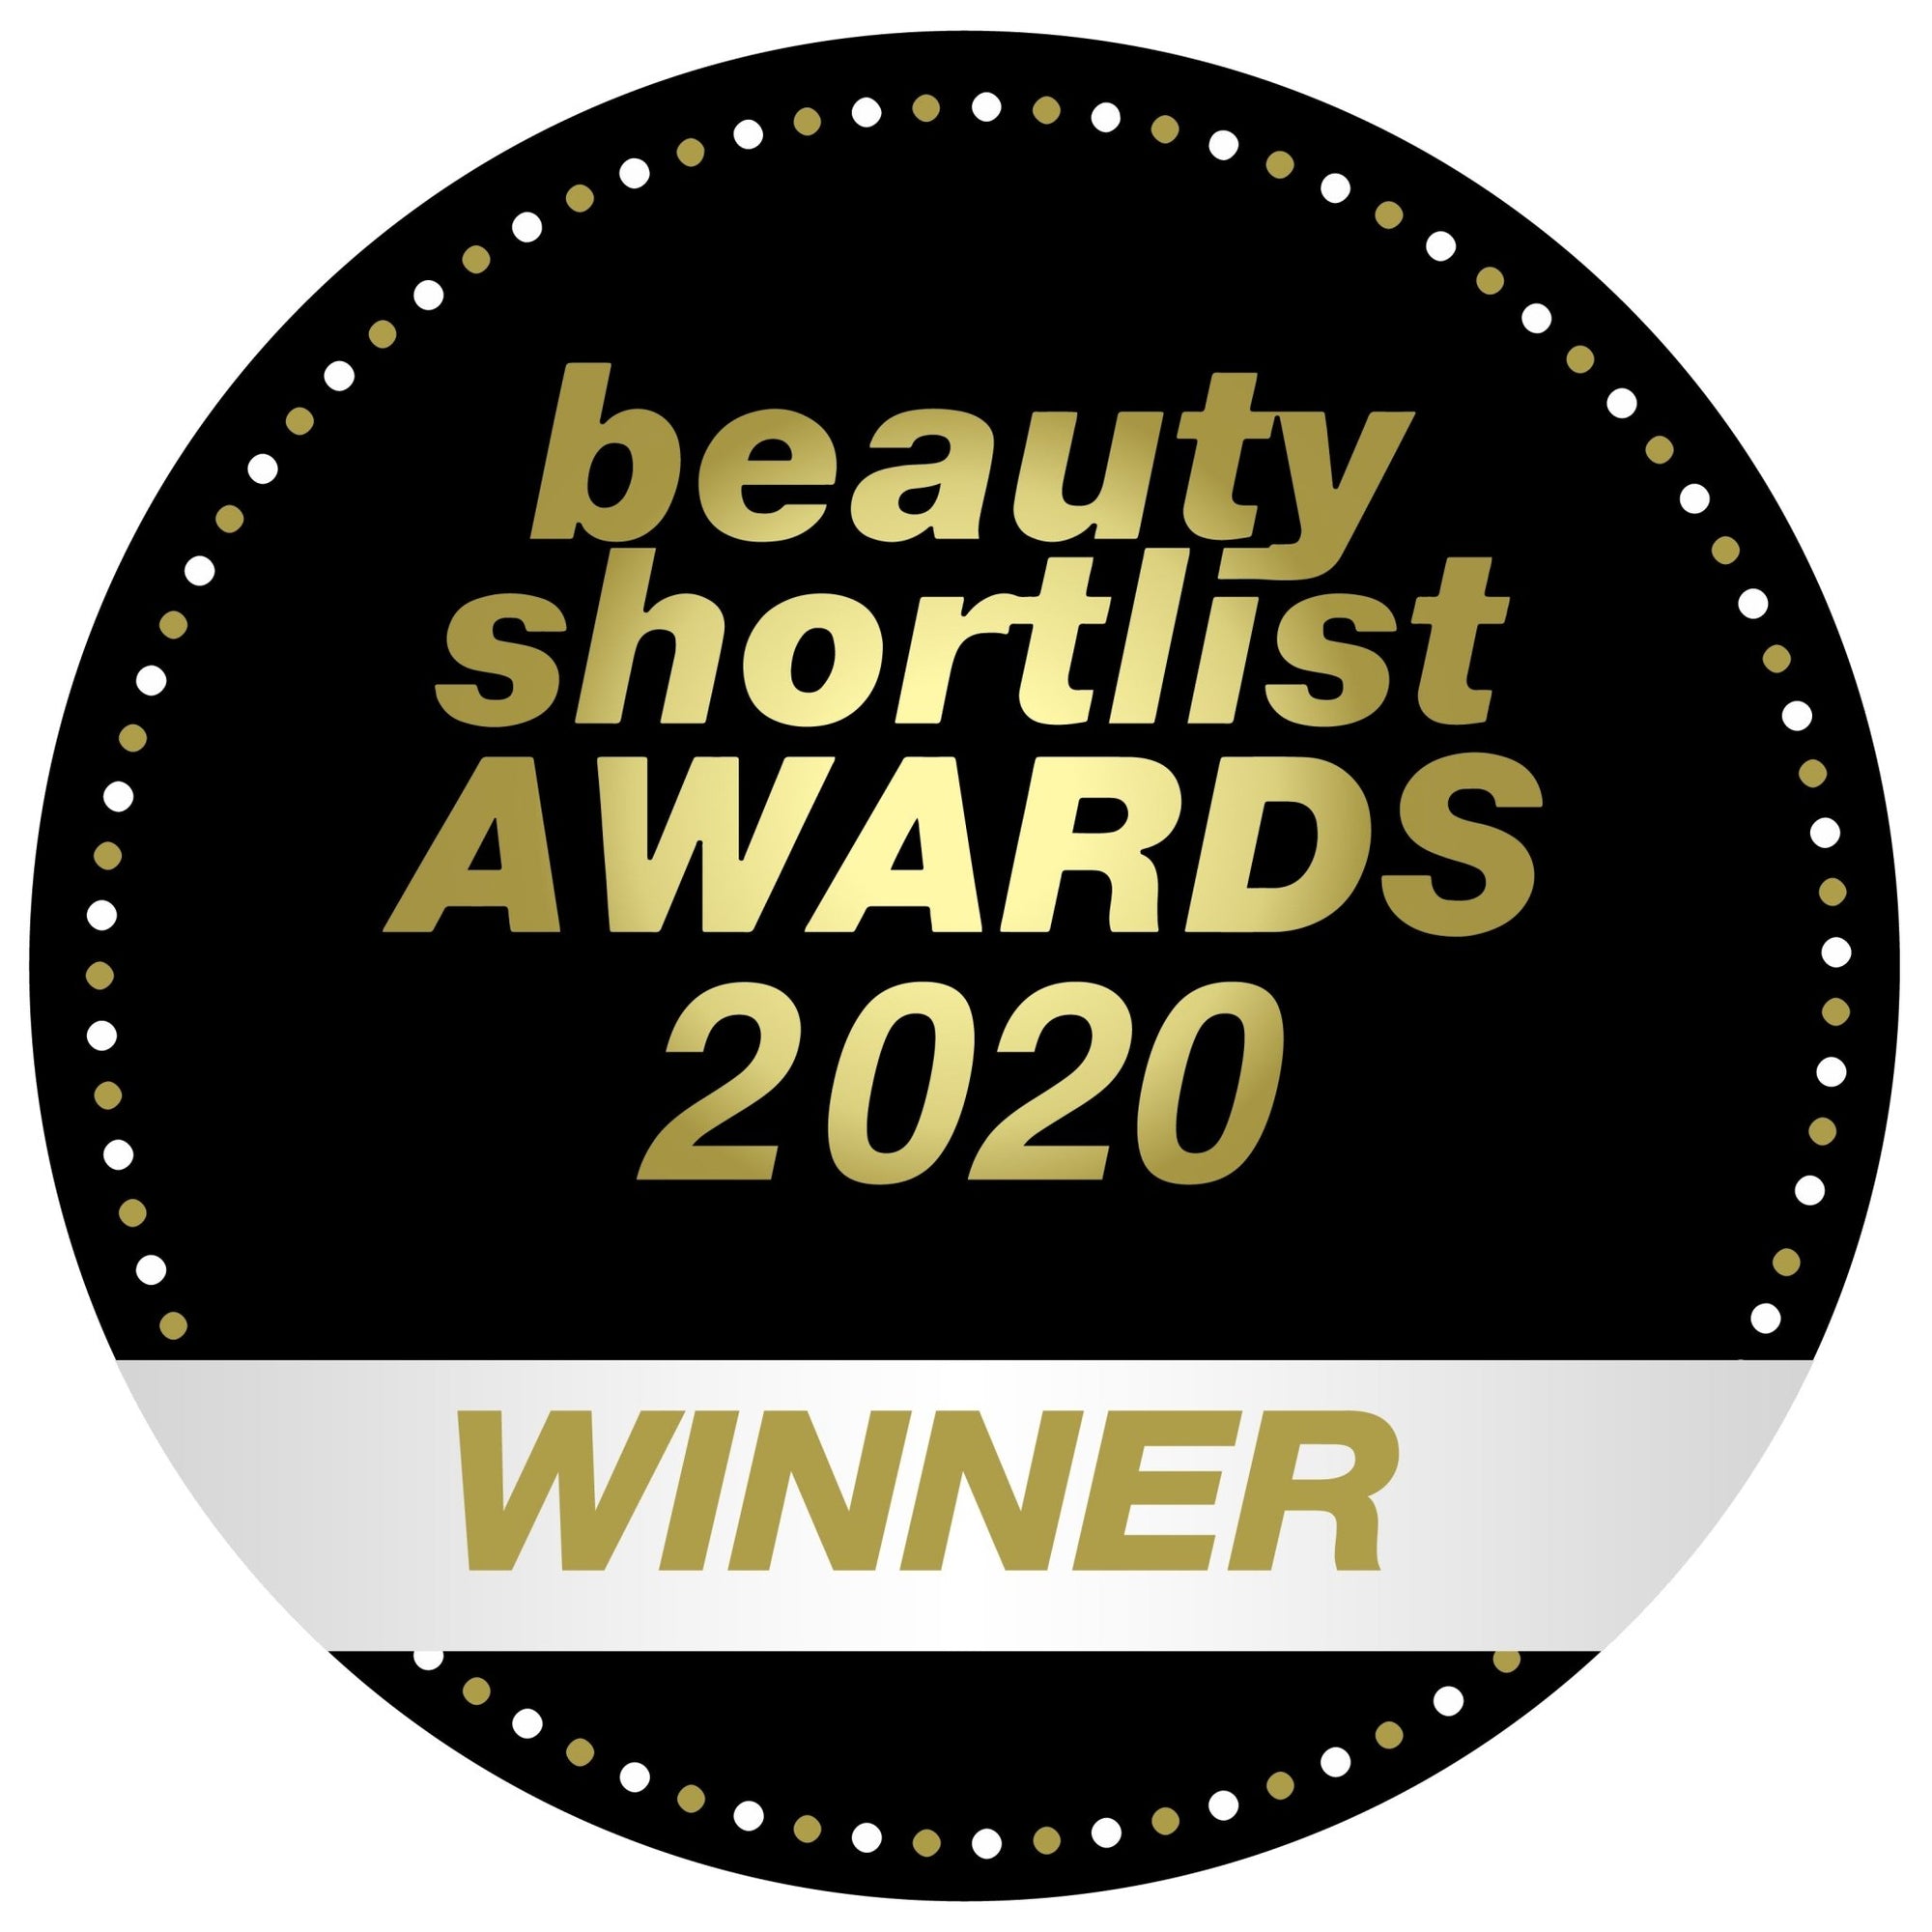 Indagáre Natural Beauty Brings Home The Award for Best Hair Oil in the 2020 Beauty Shortlist Awards (Global). - Indagare Natural Beauty